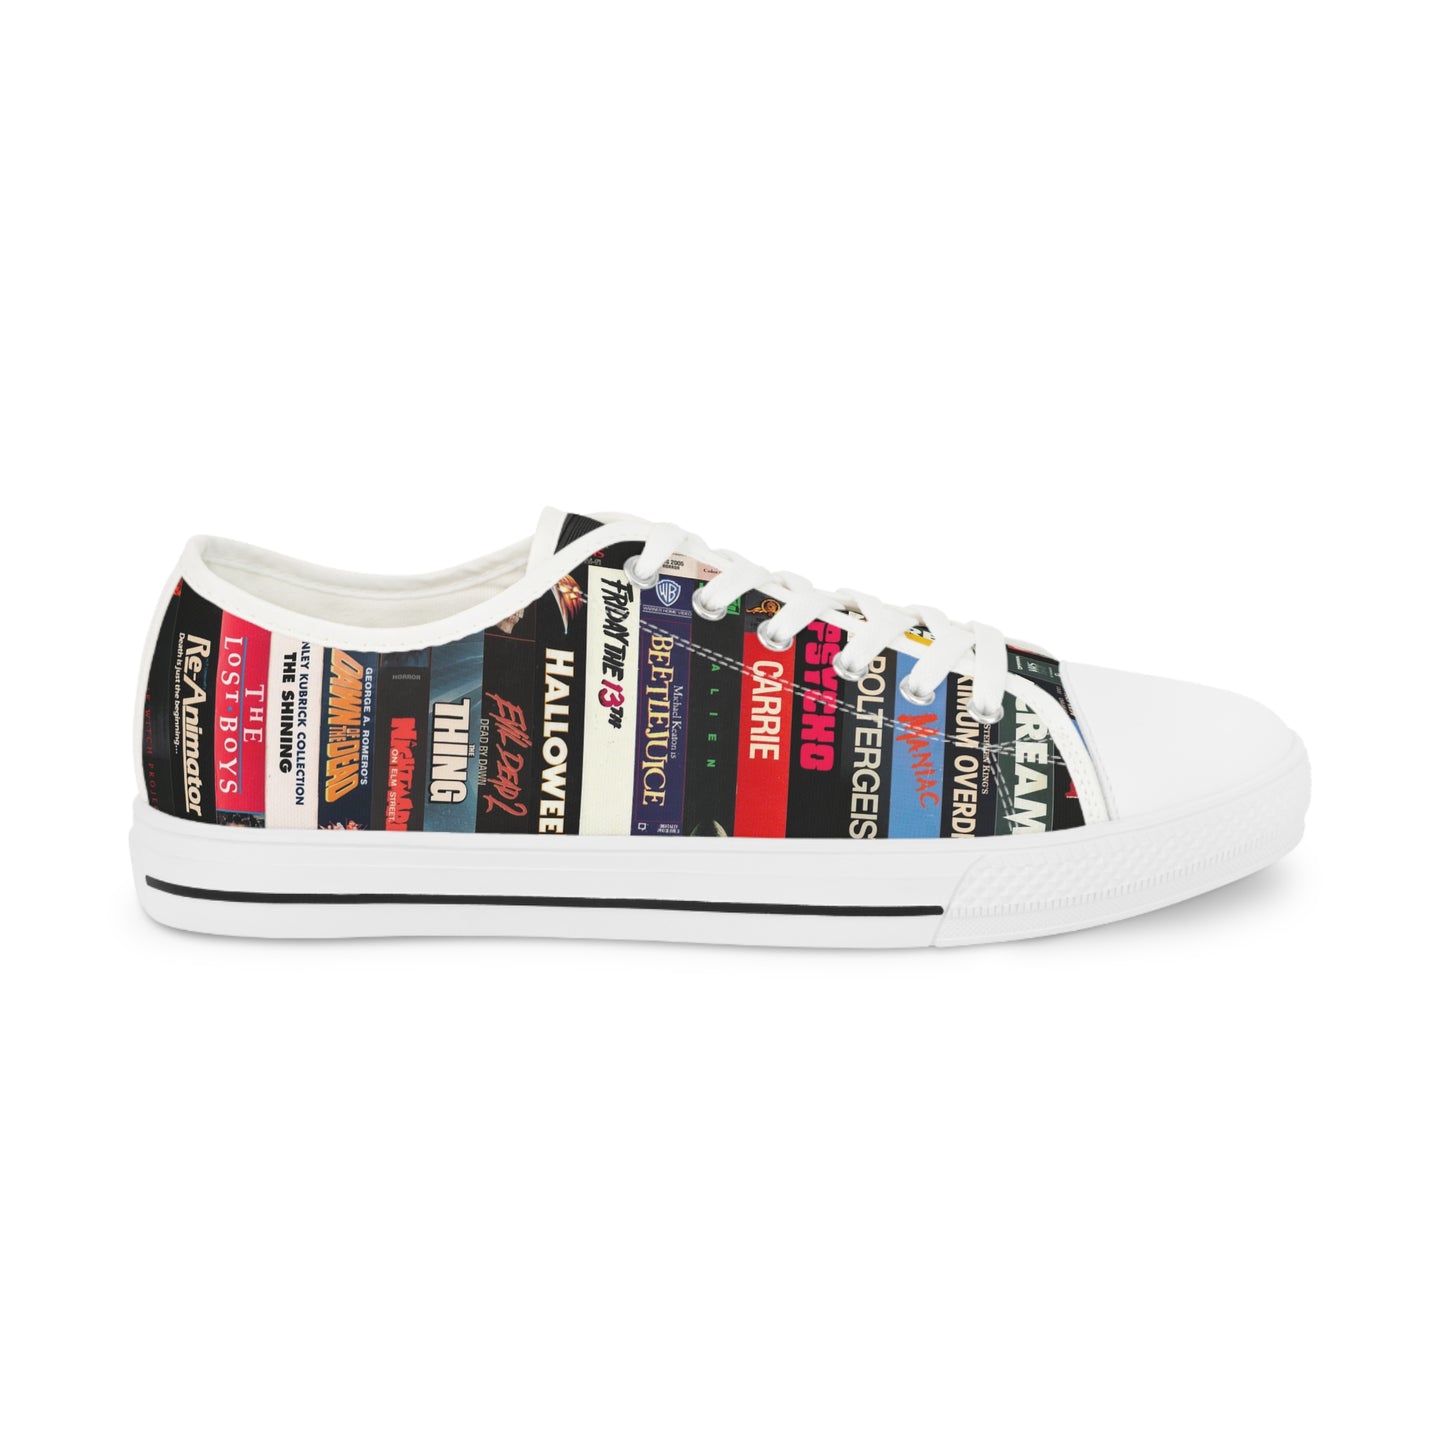 VHS Collection Men's Low Top Sneakers